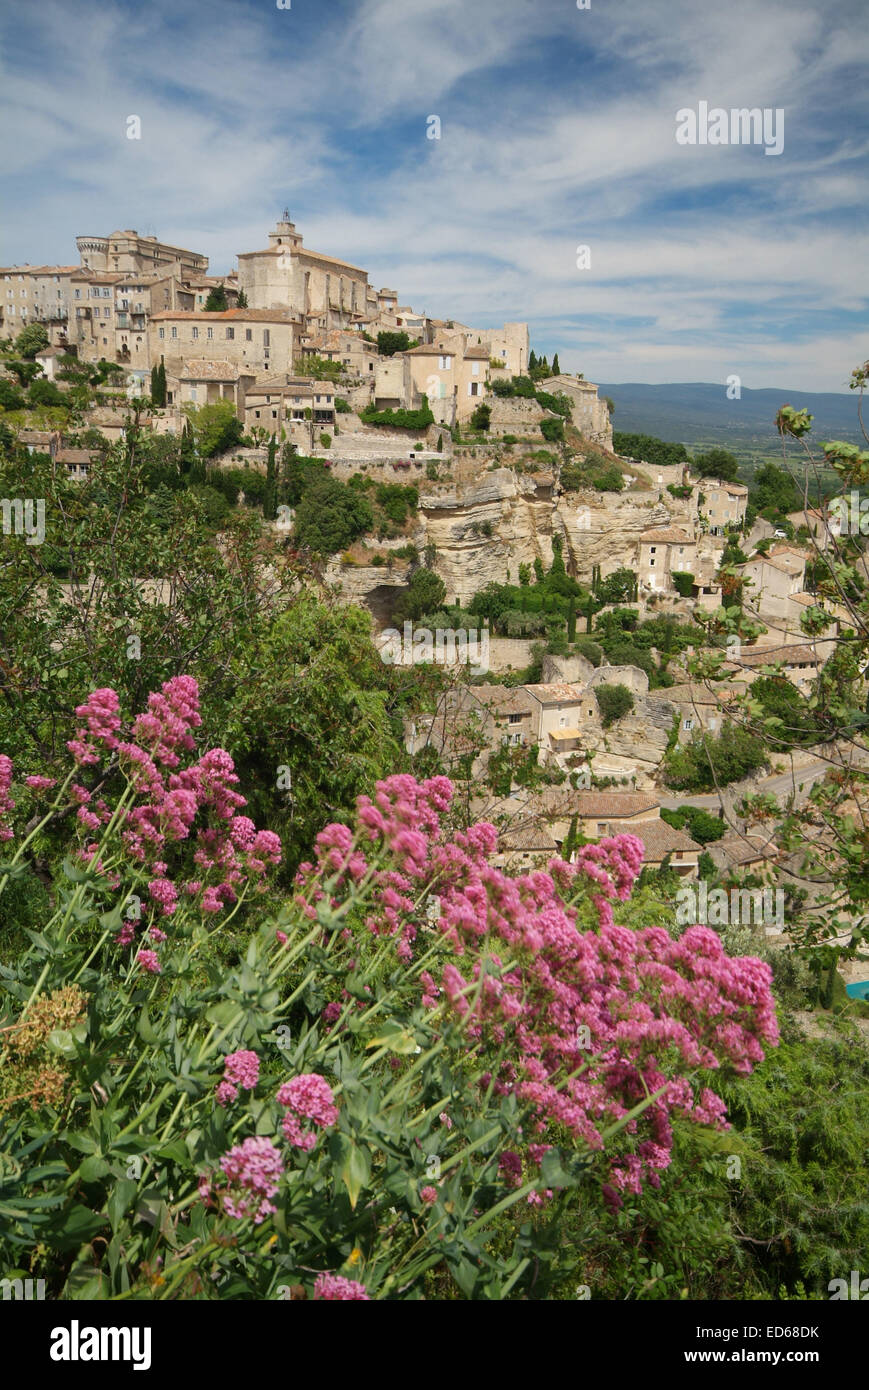 Gordes in the Les Monts de Vauclusein the Luberon Valley of France Stock Photo